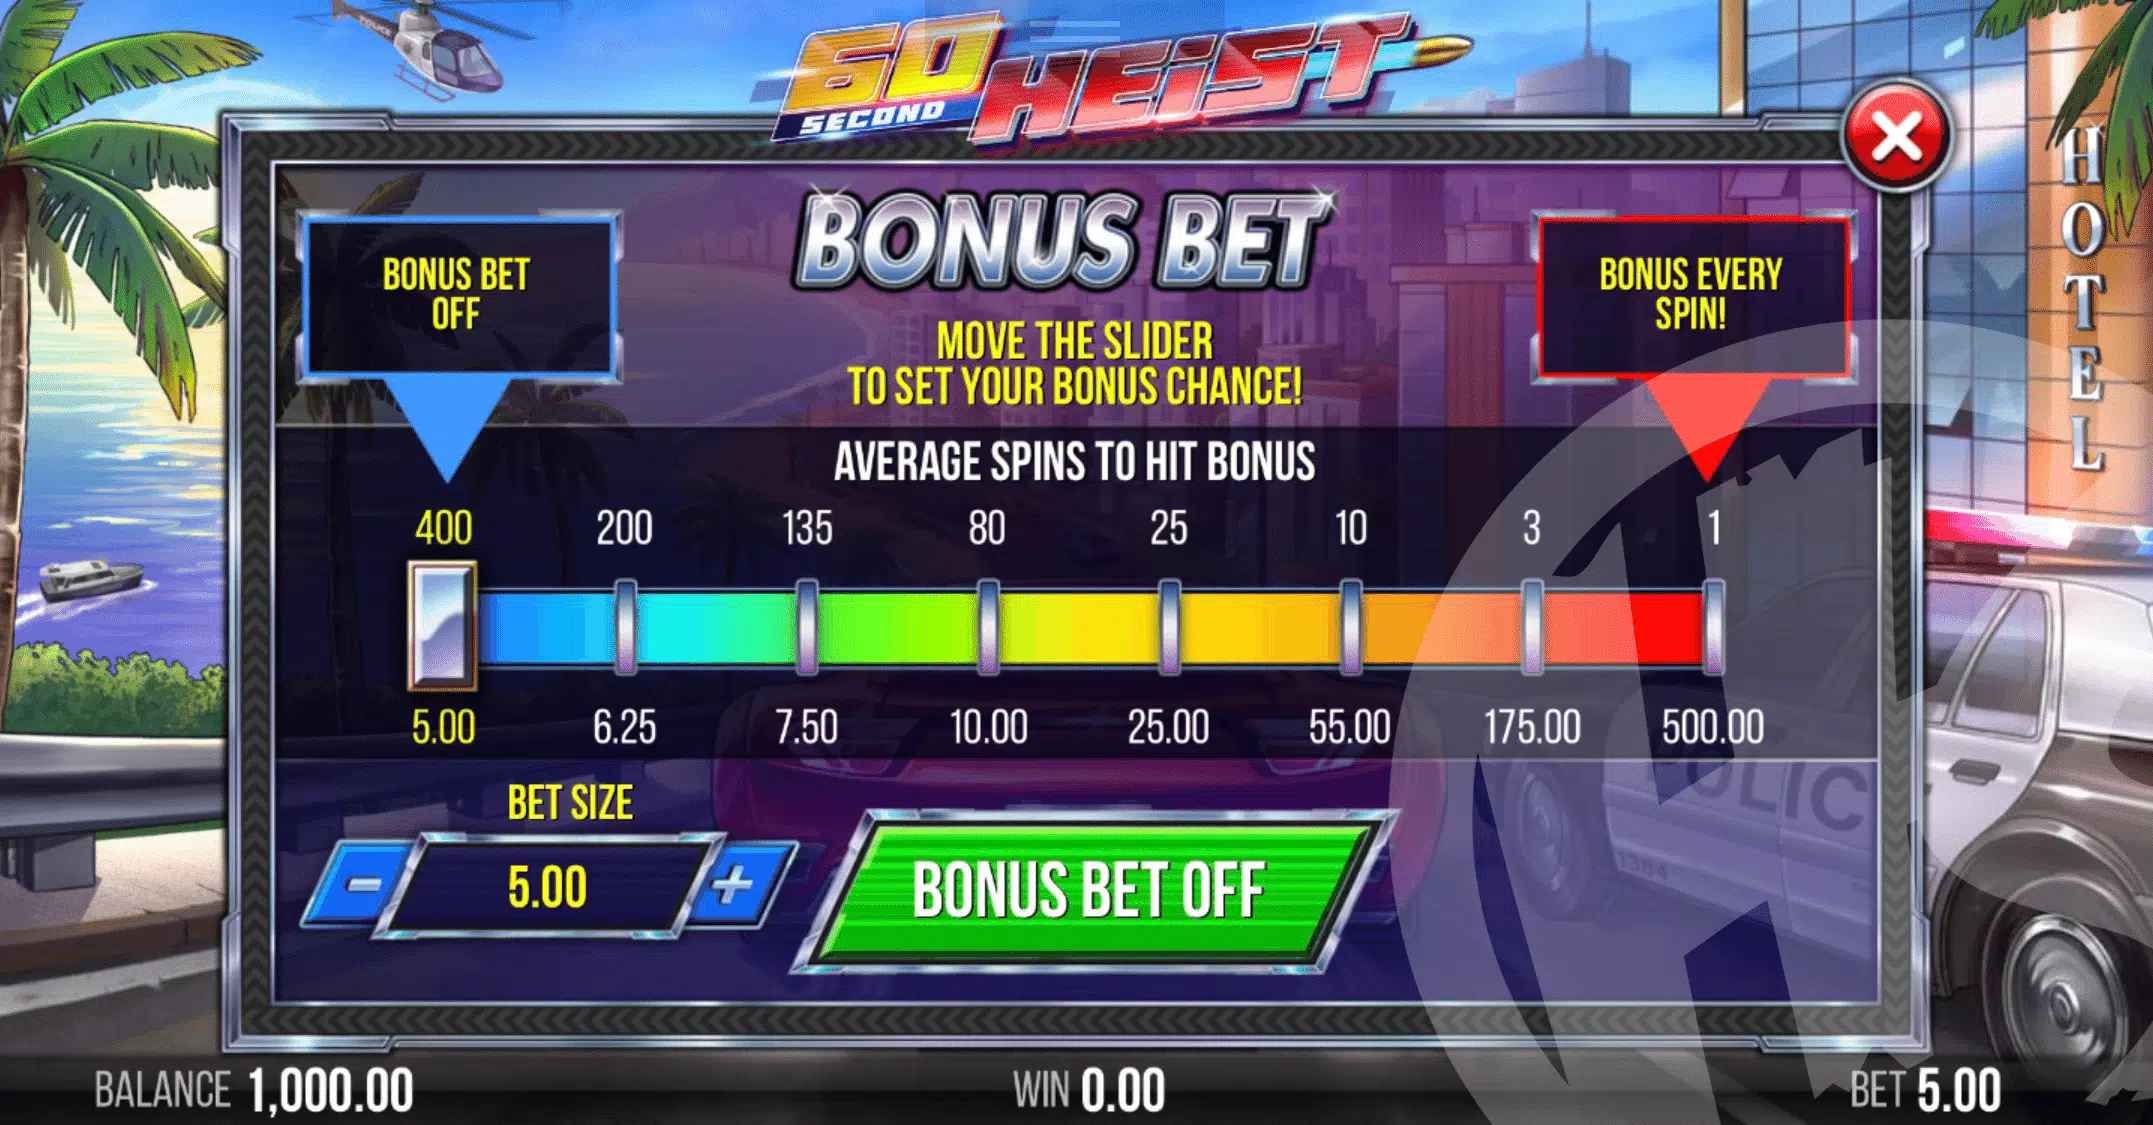 Bonus Bet Allows Players to Bet More for an Increased Chance to Trigger Free Spins 